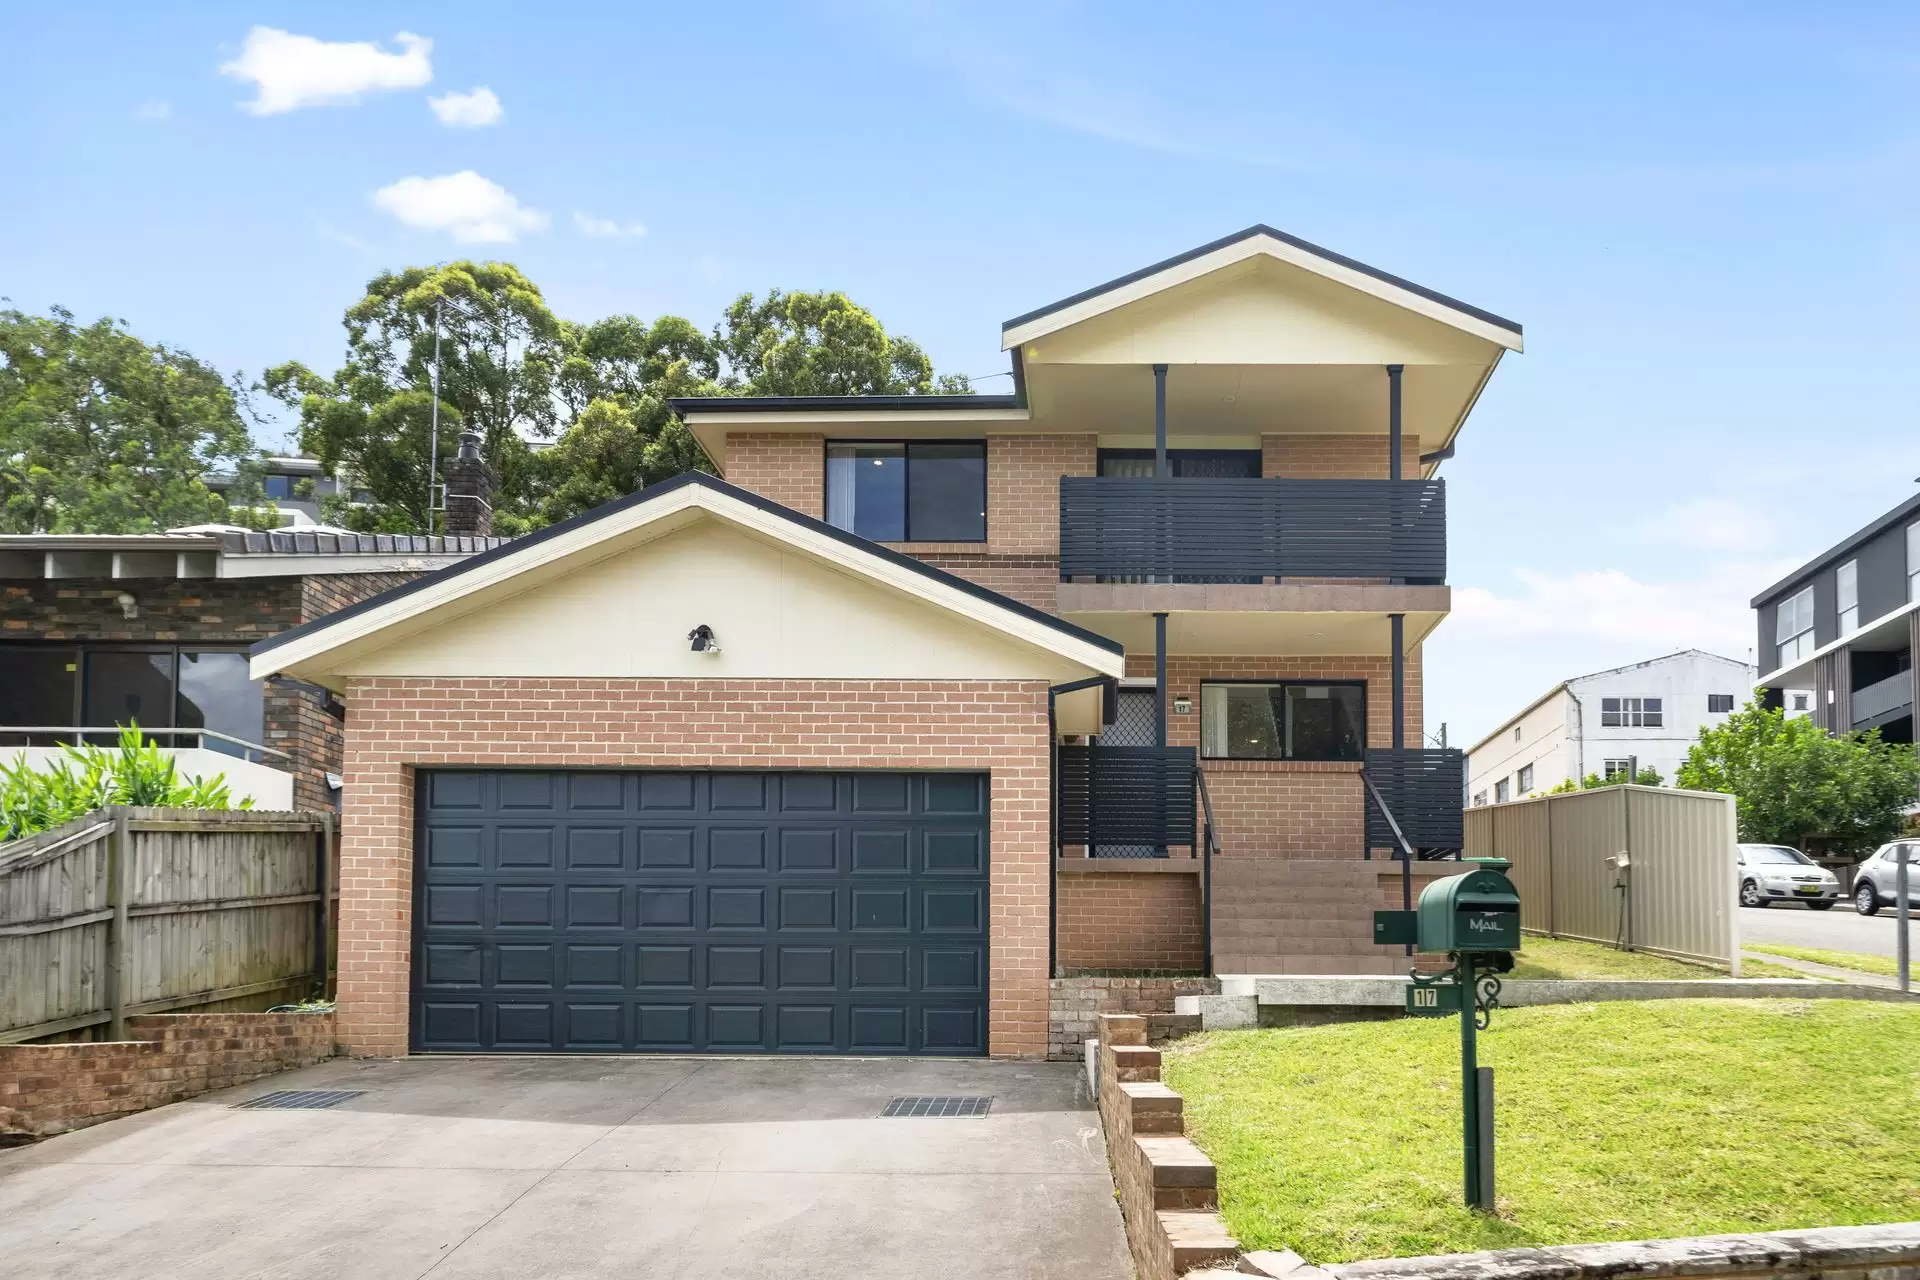 17 Farm Street, Gladesville For Lease by Cassidy Real Estate - image 1